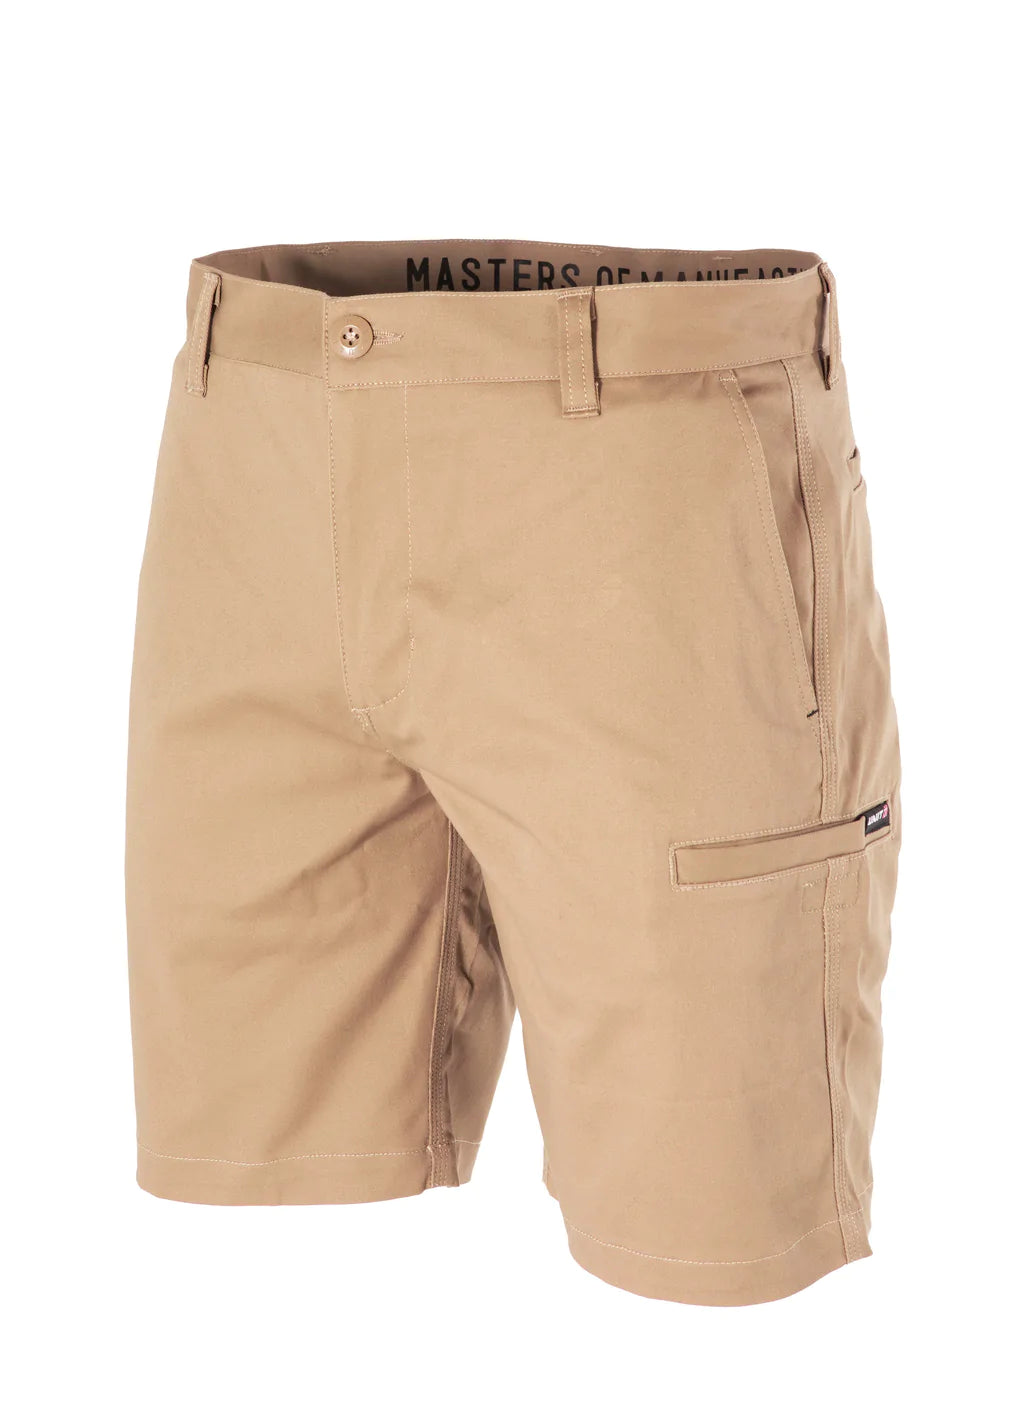 MENS SHORTS - 189138001 - WORK - IGNITION